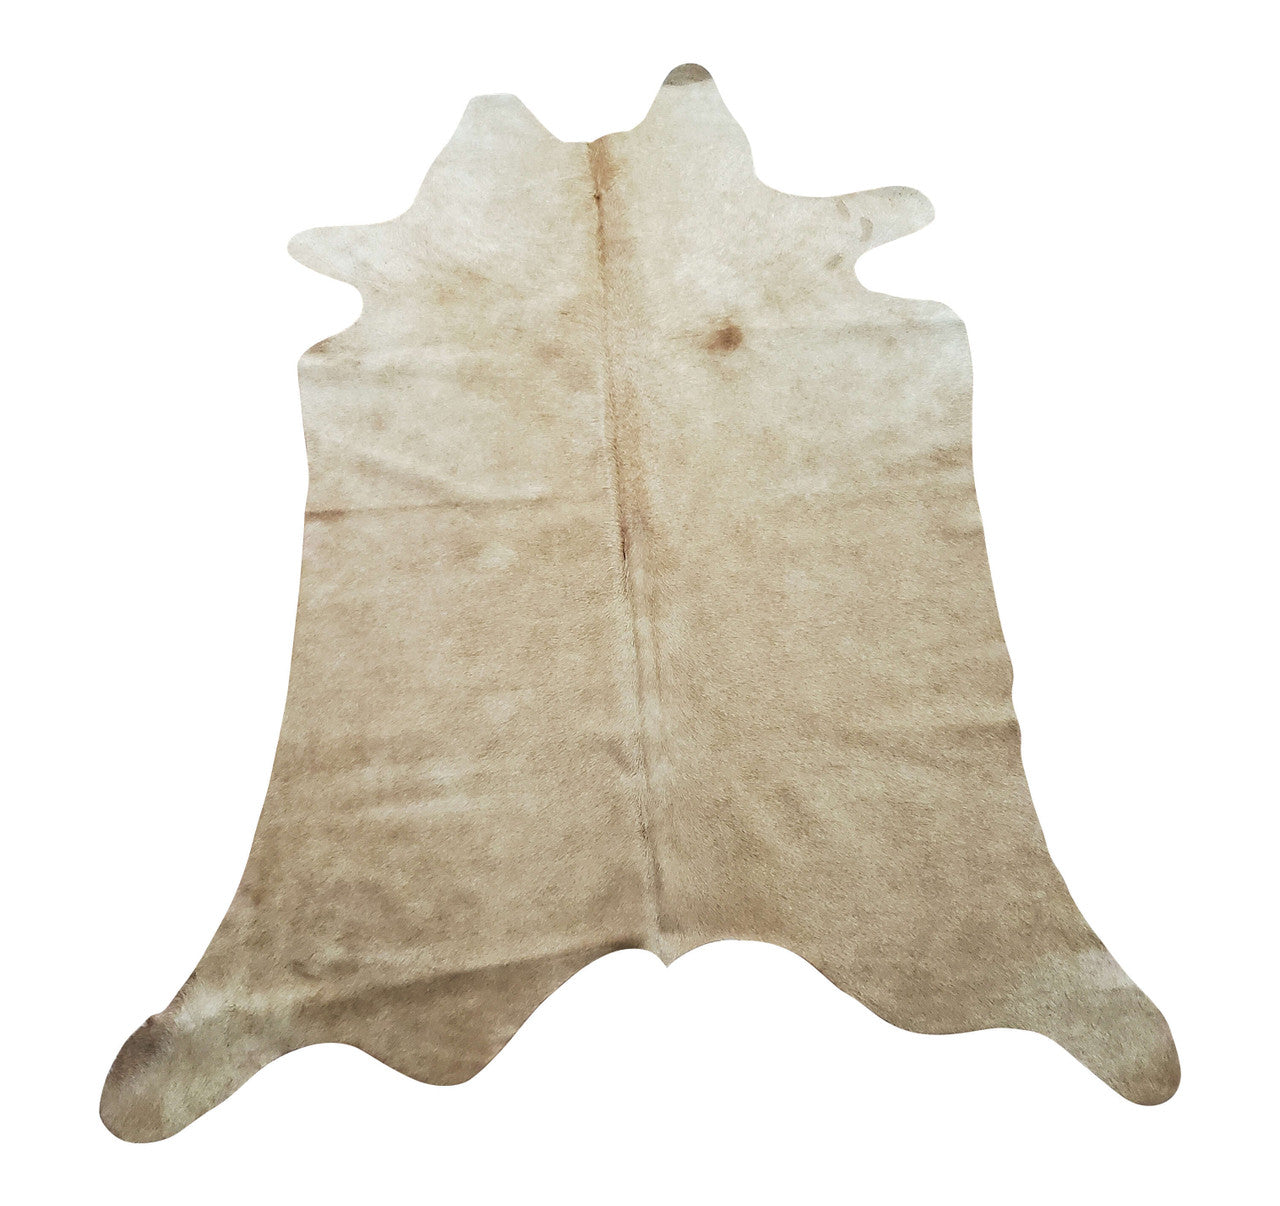 This genuine extra small cowhide rug is the perfect addition to any room. The natural beige color is sure to complement any style, while the soft, luxurious texture adds a touch of comfort. 